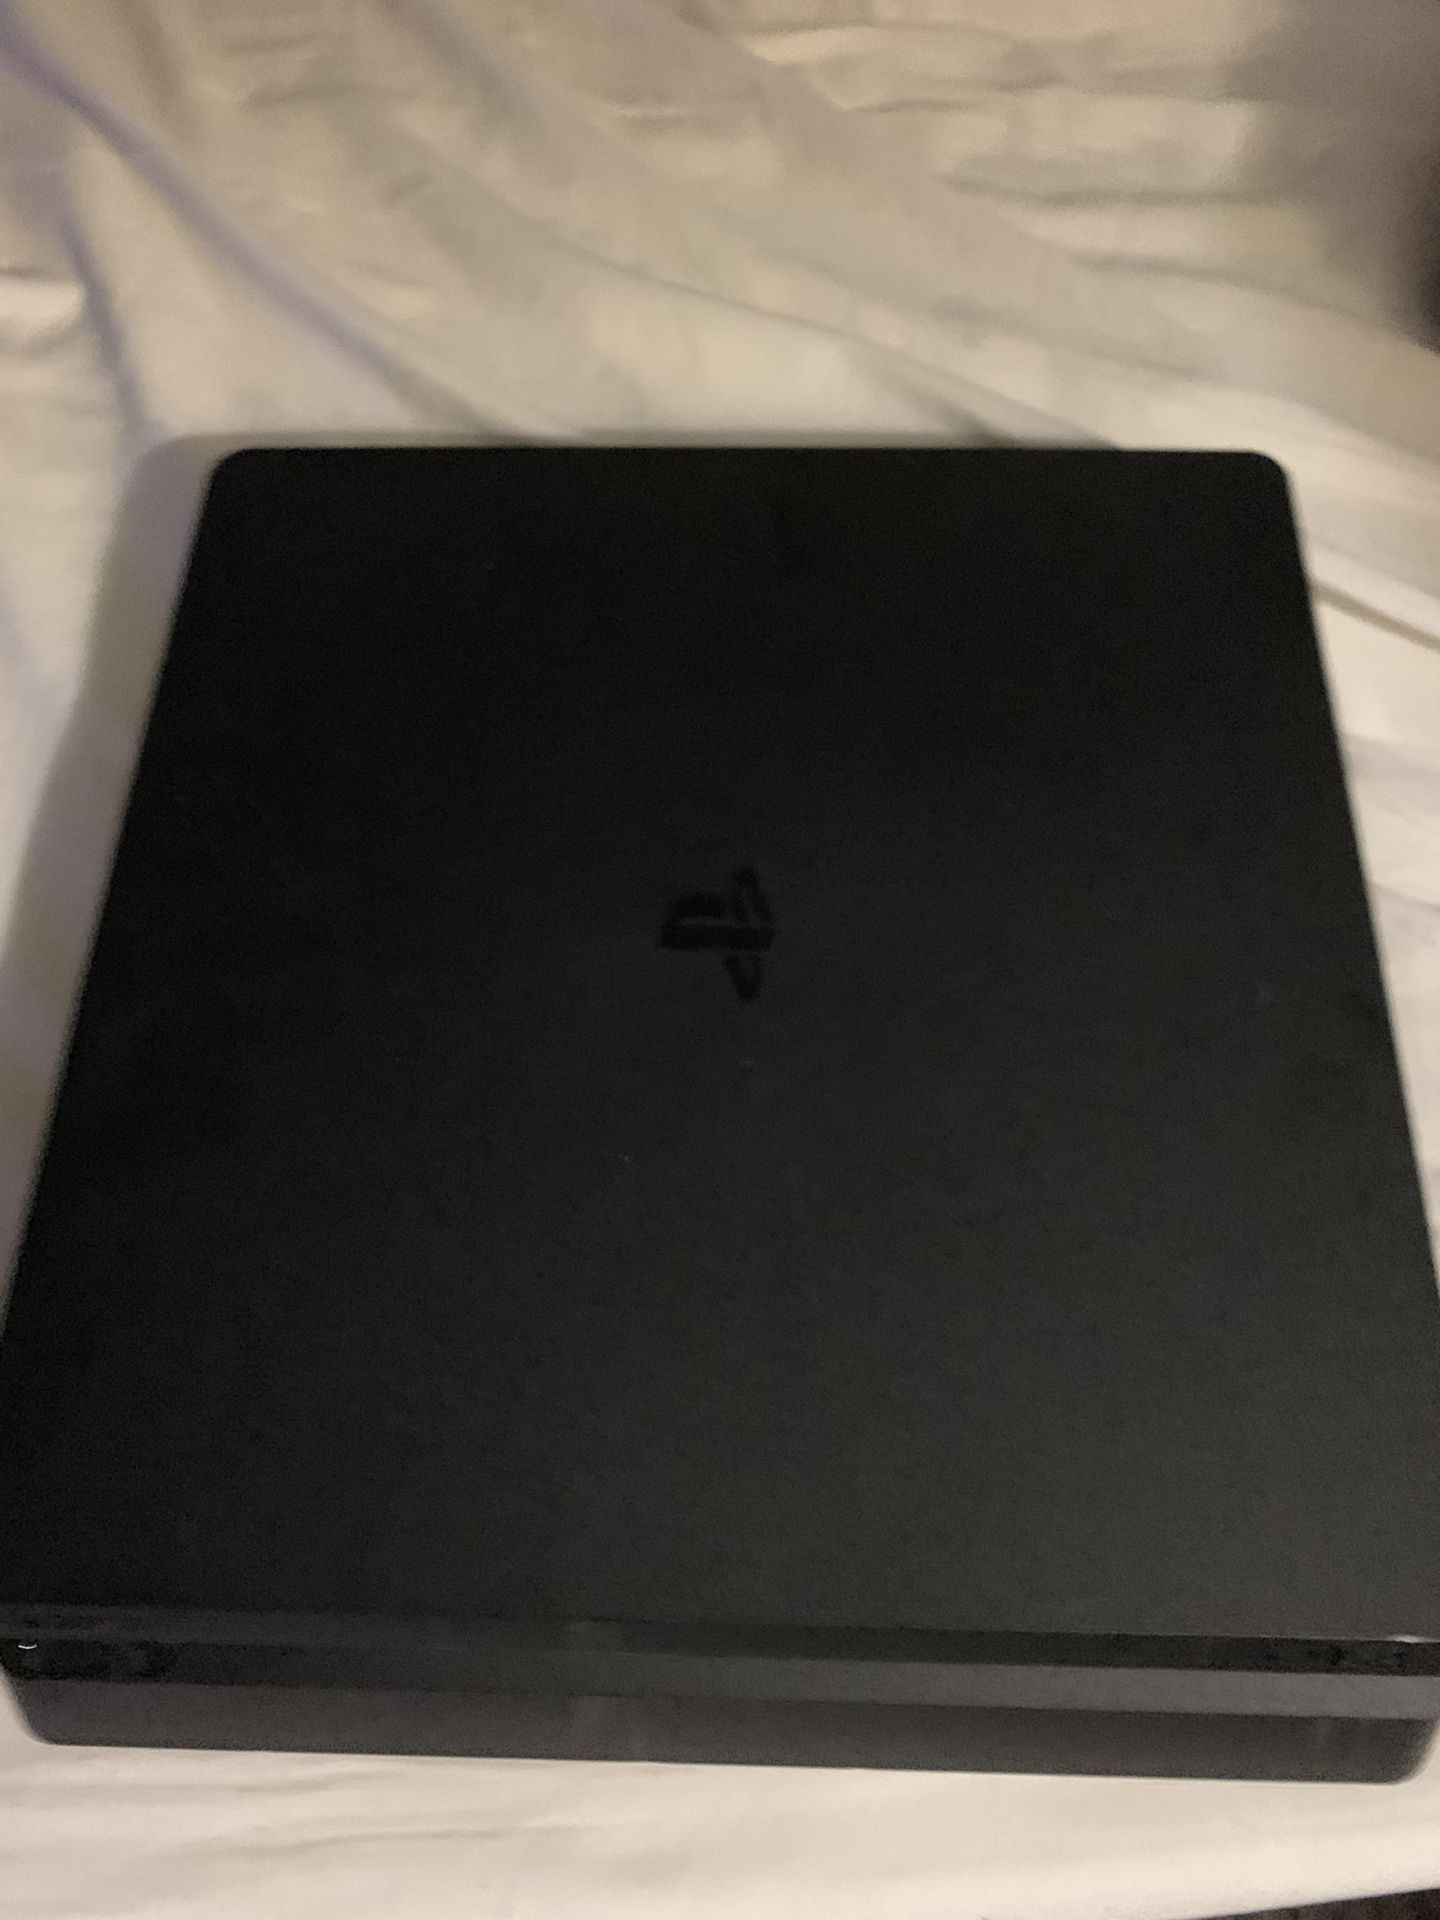 PS4 Slim with controller and cables